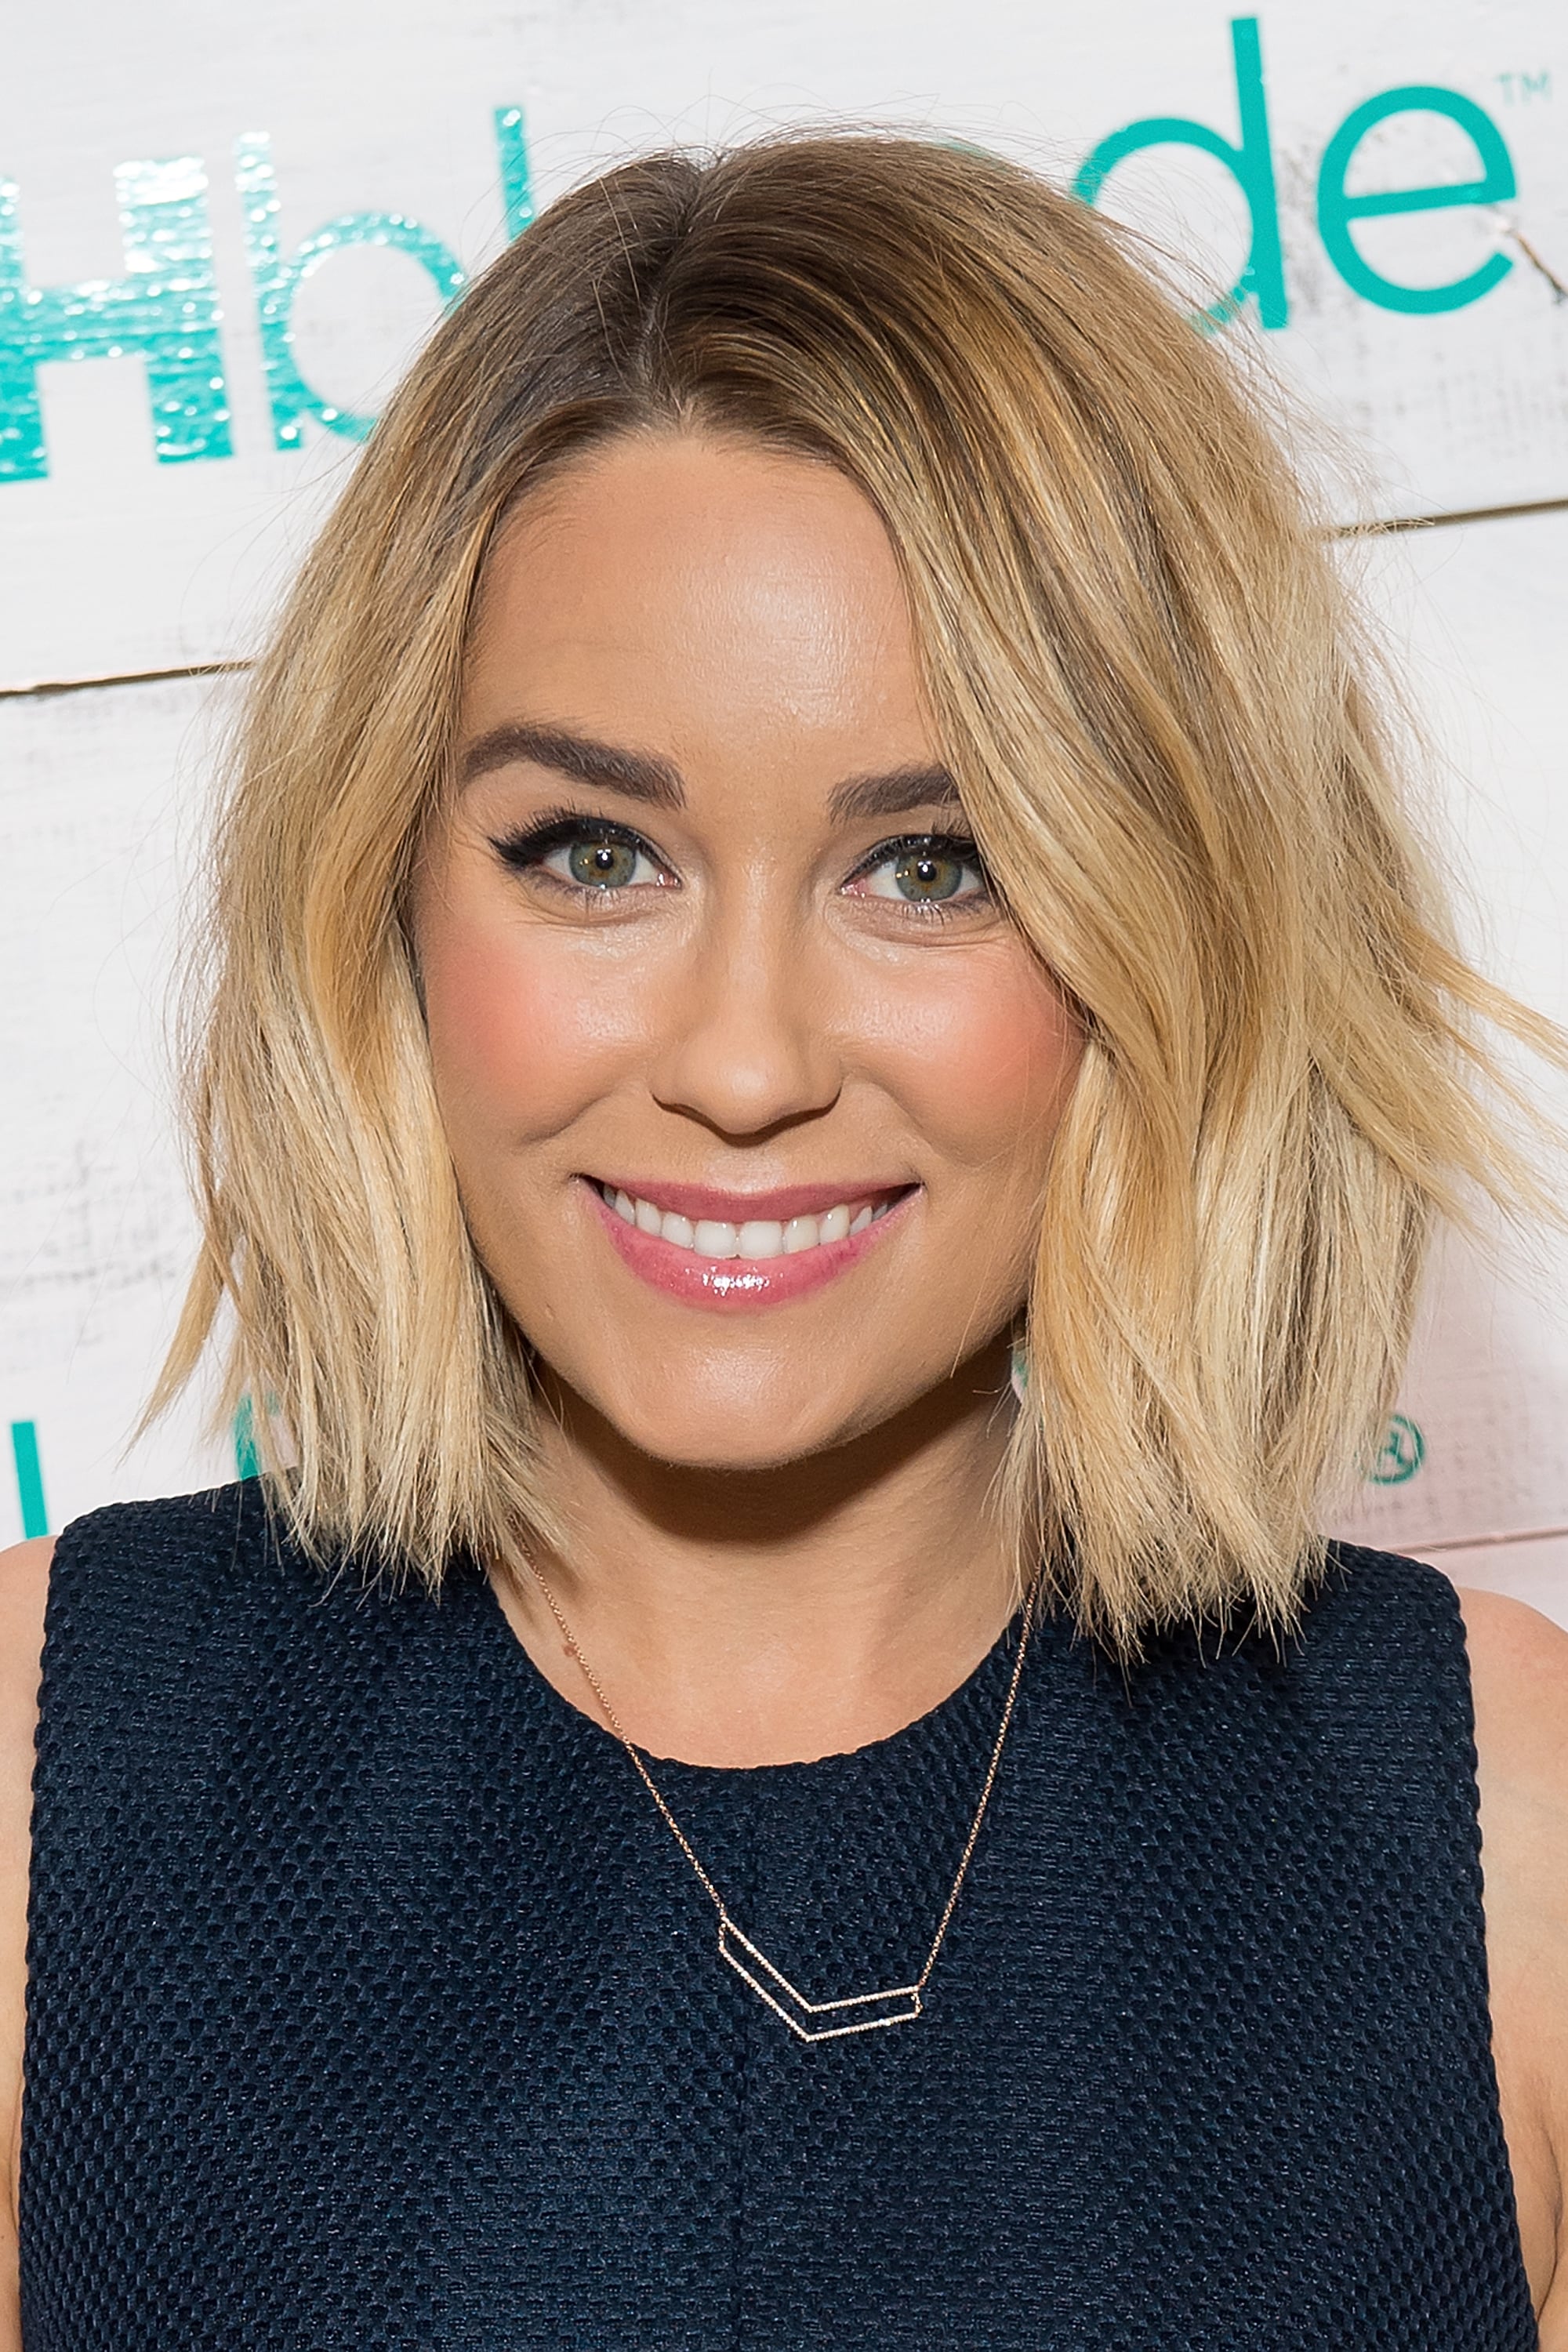 Lauren Conrad Shares Her Favorite Things With Us